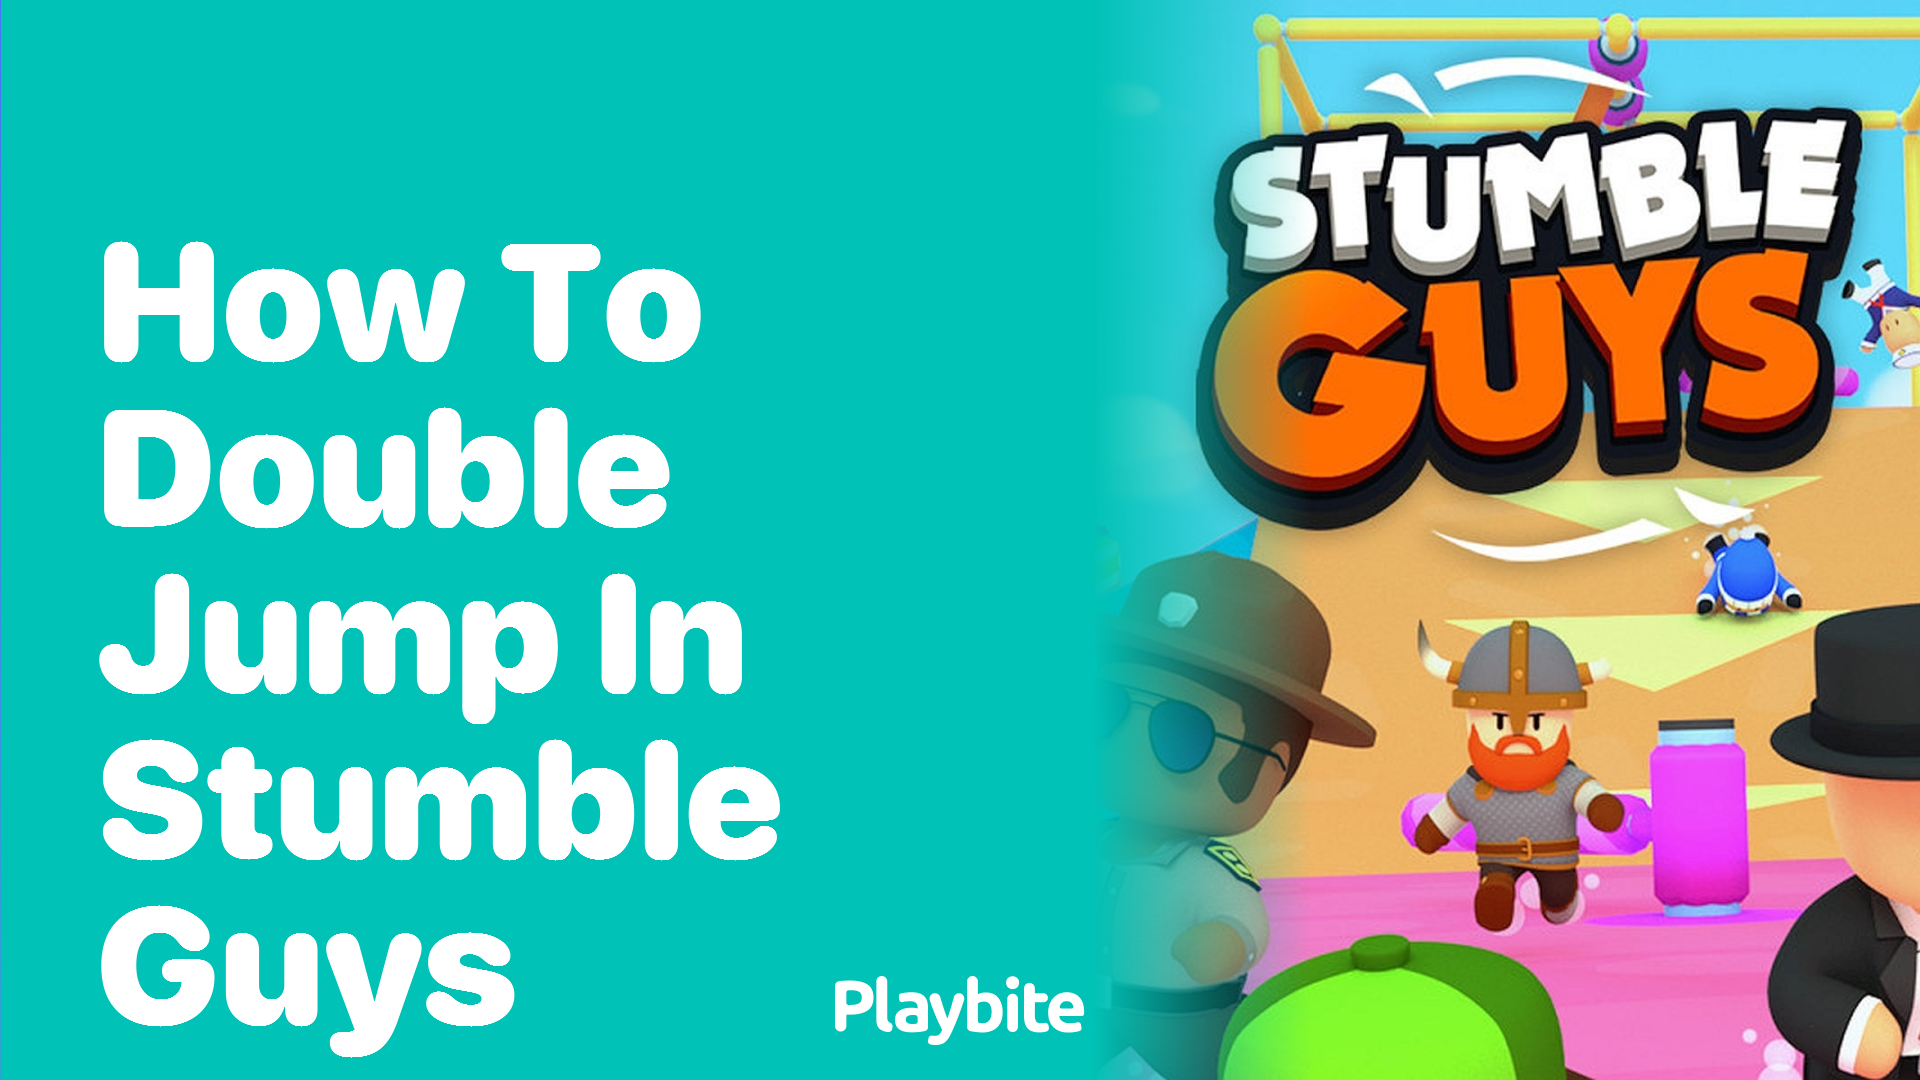 How to Double Jump in Stumble Guys